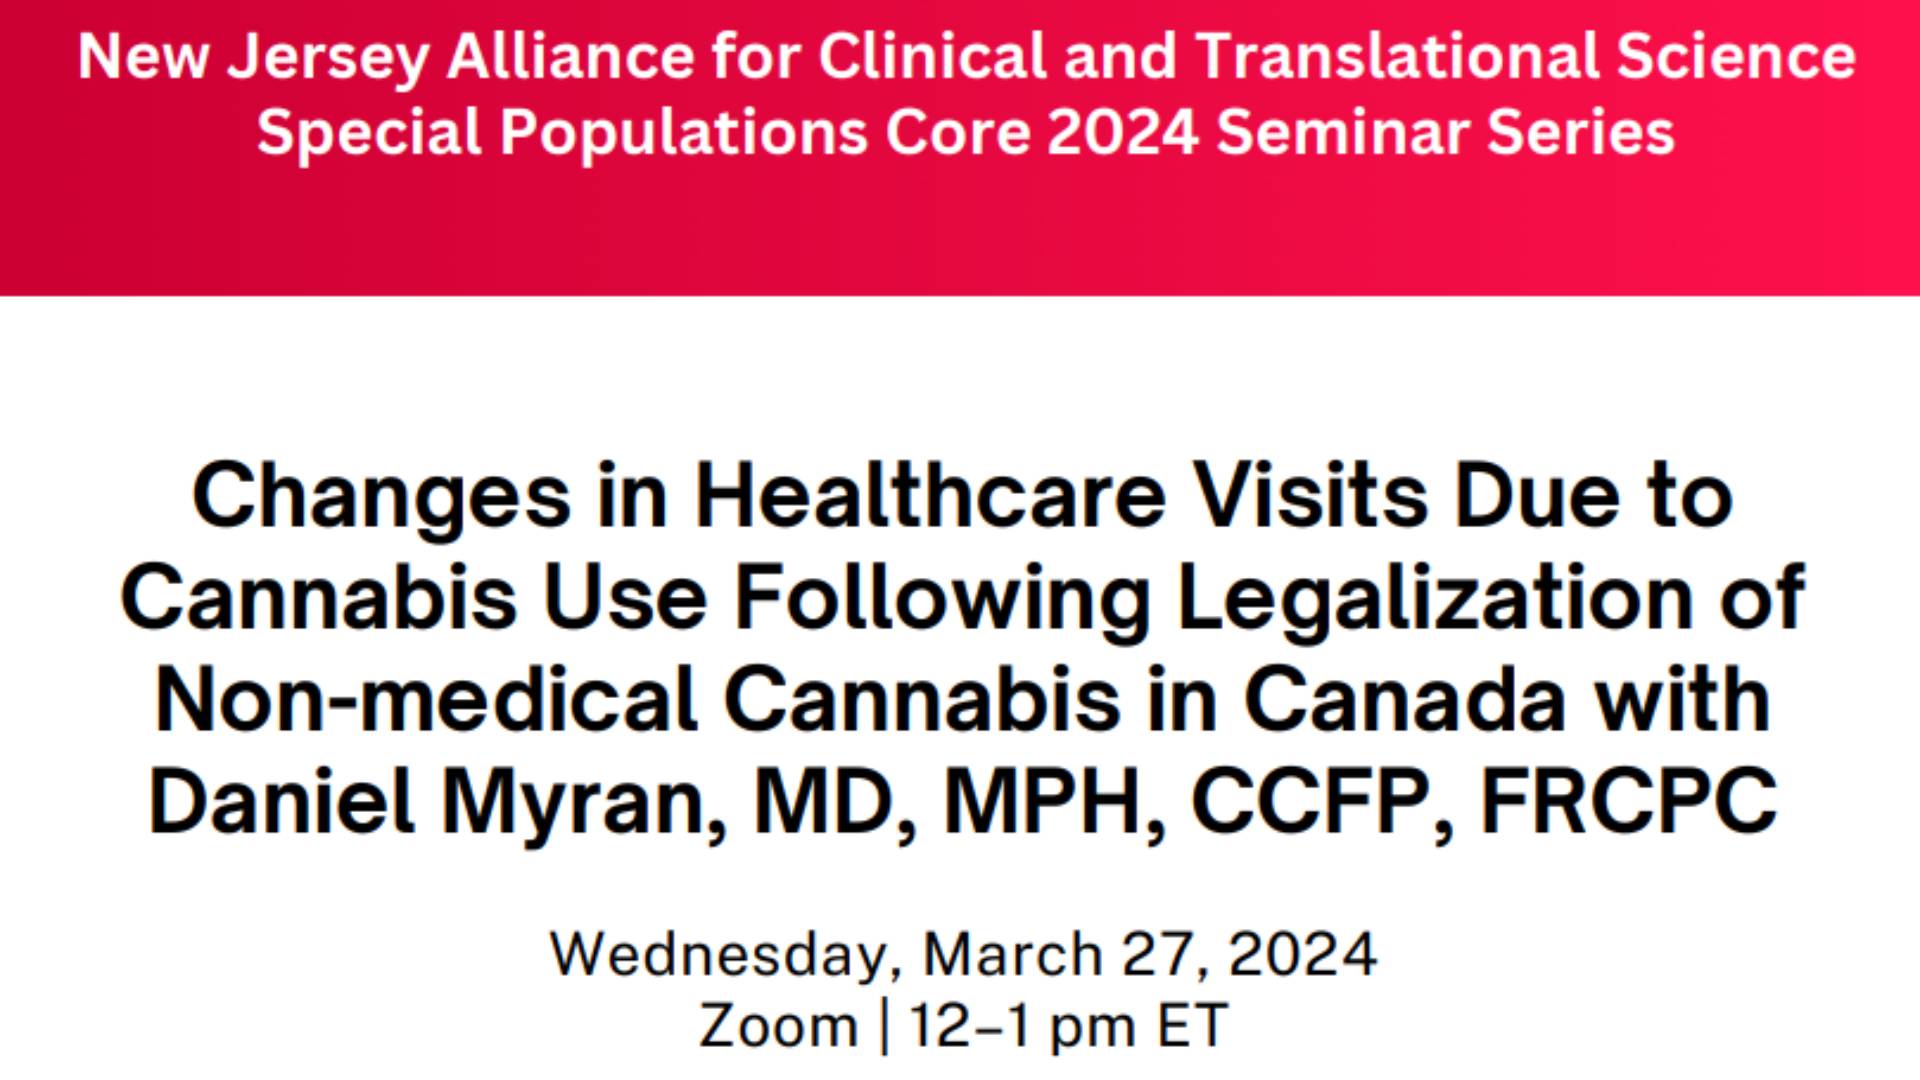 Changes in Healthcare Visits Due to Cannabis Use